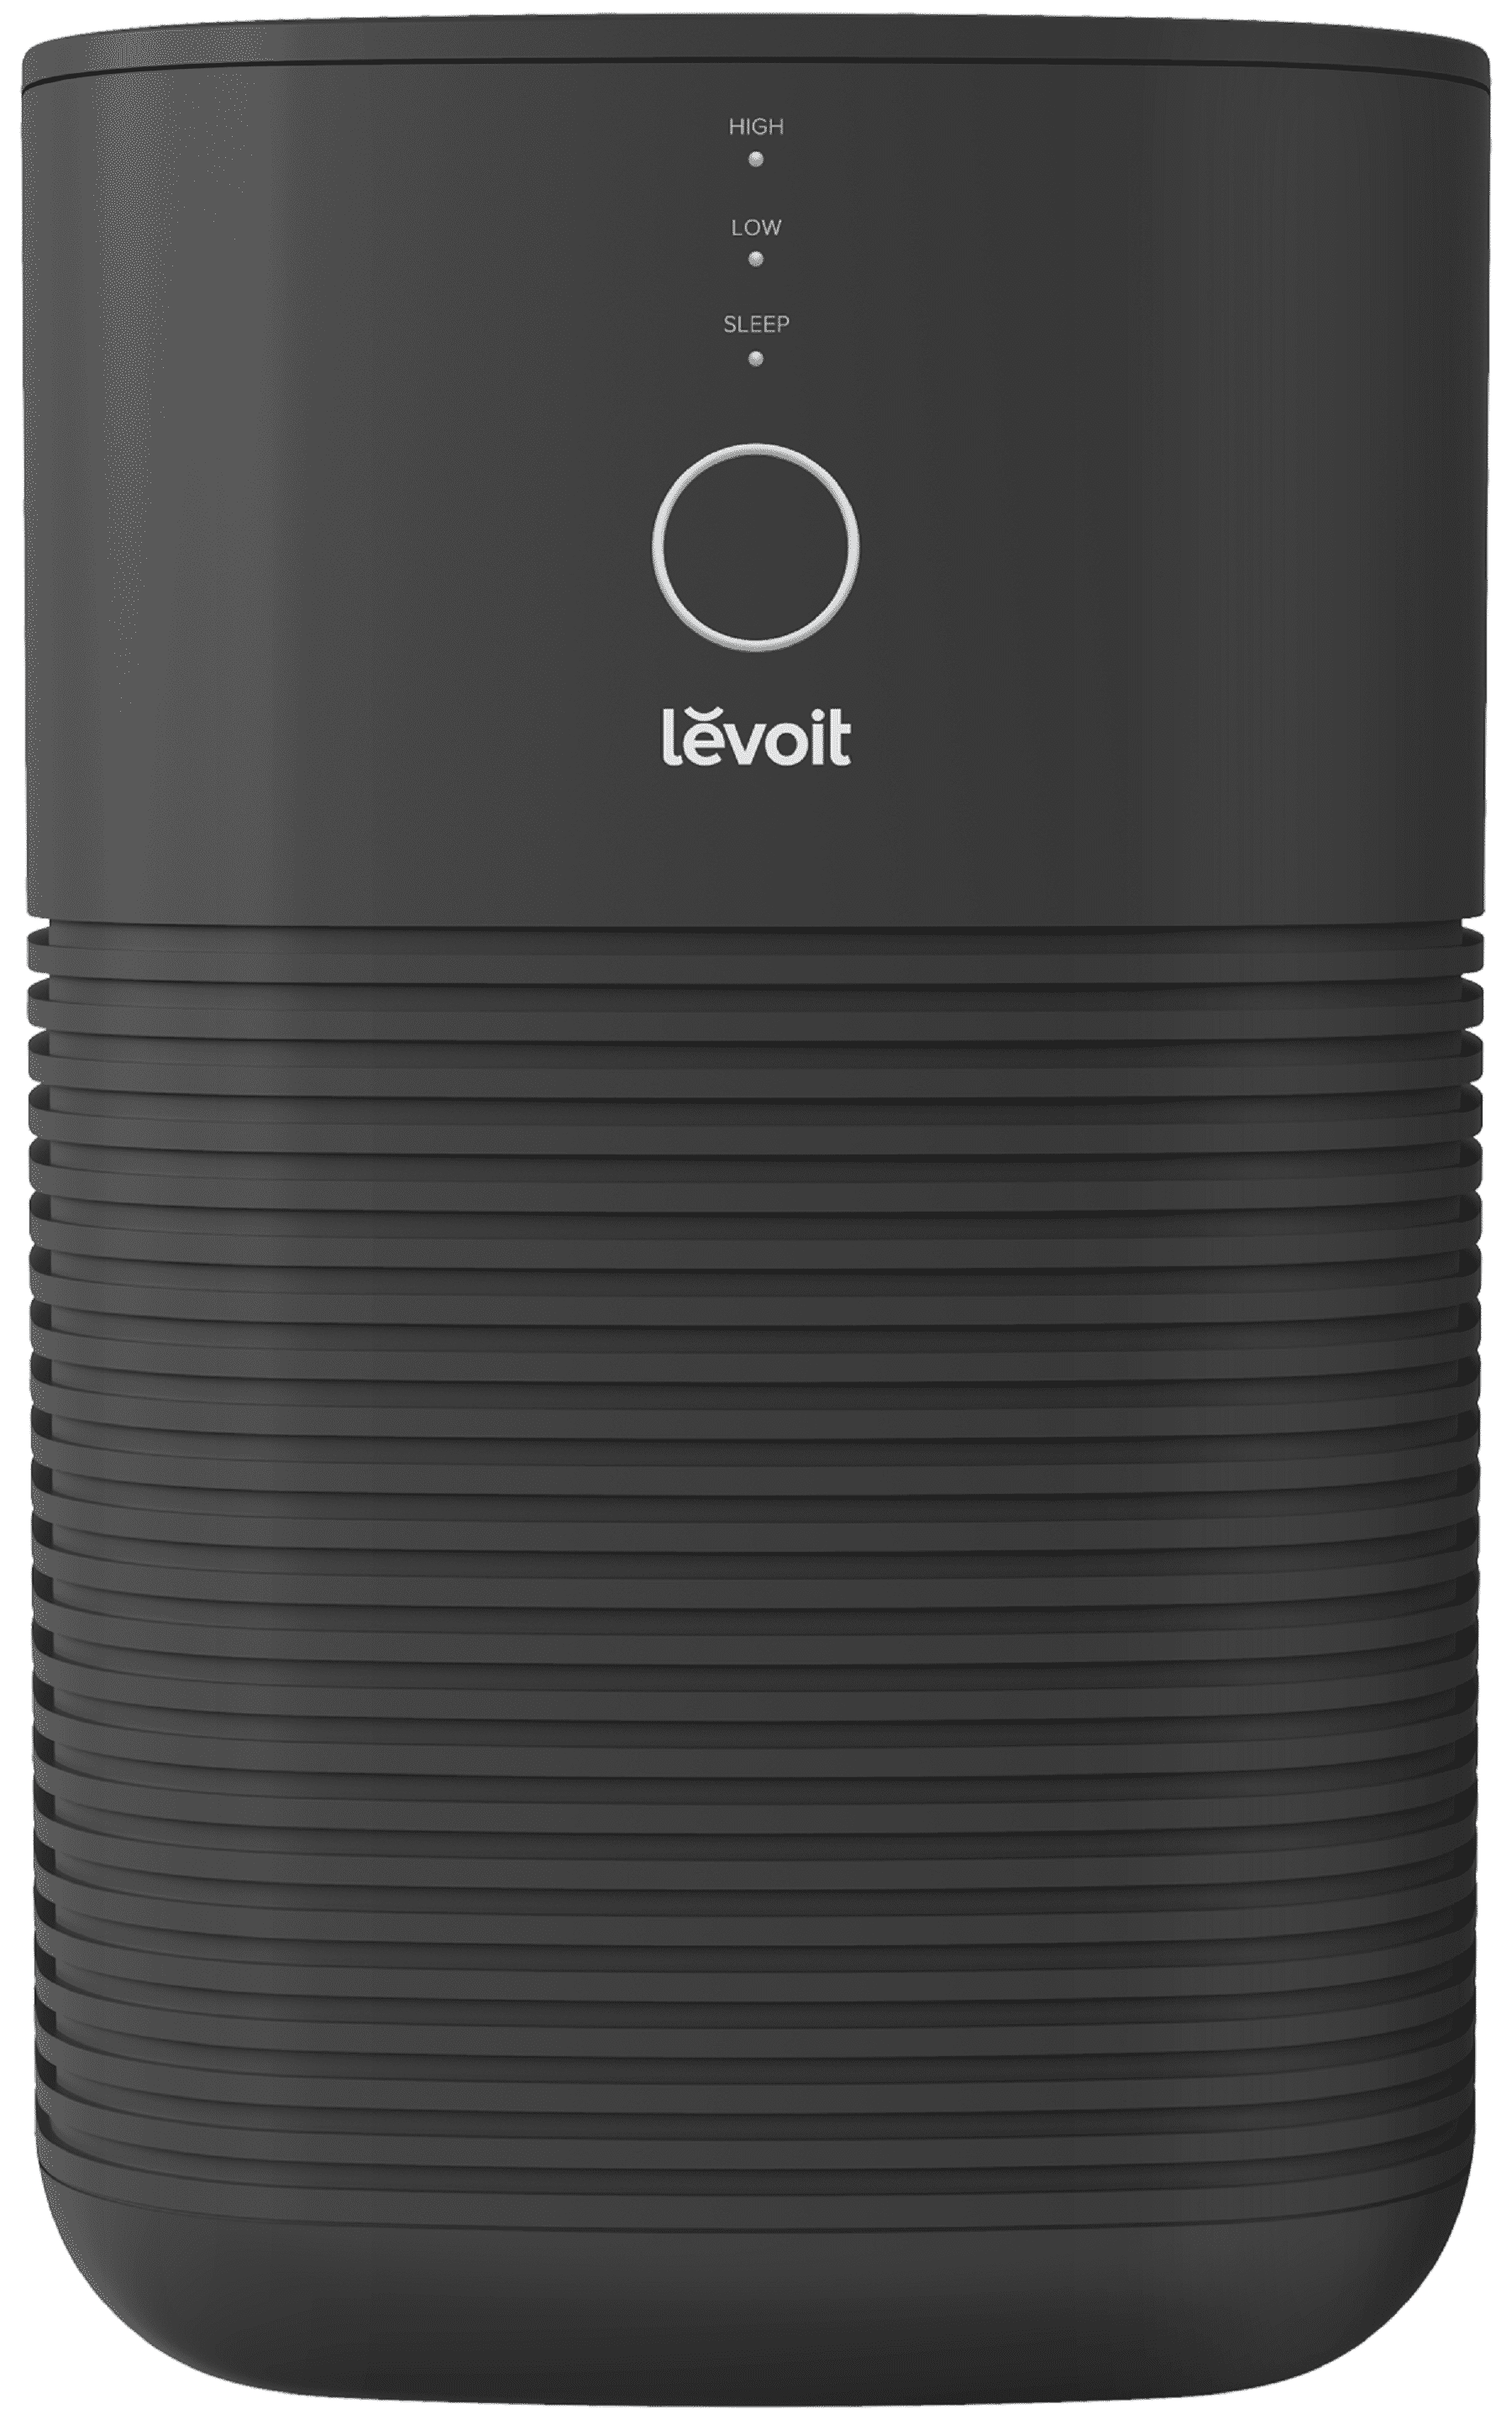 levoit air purifier replacement filter model lv-h128